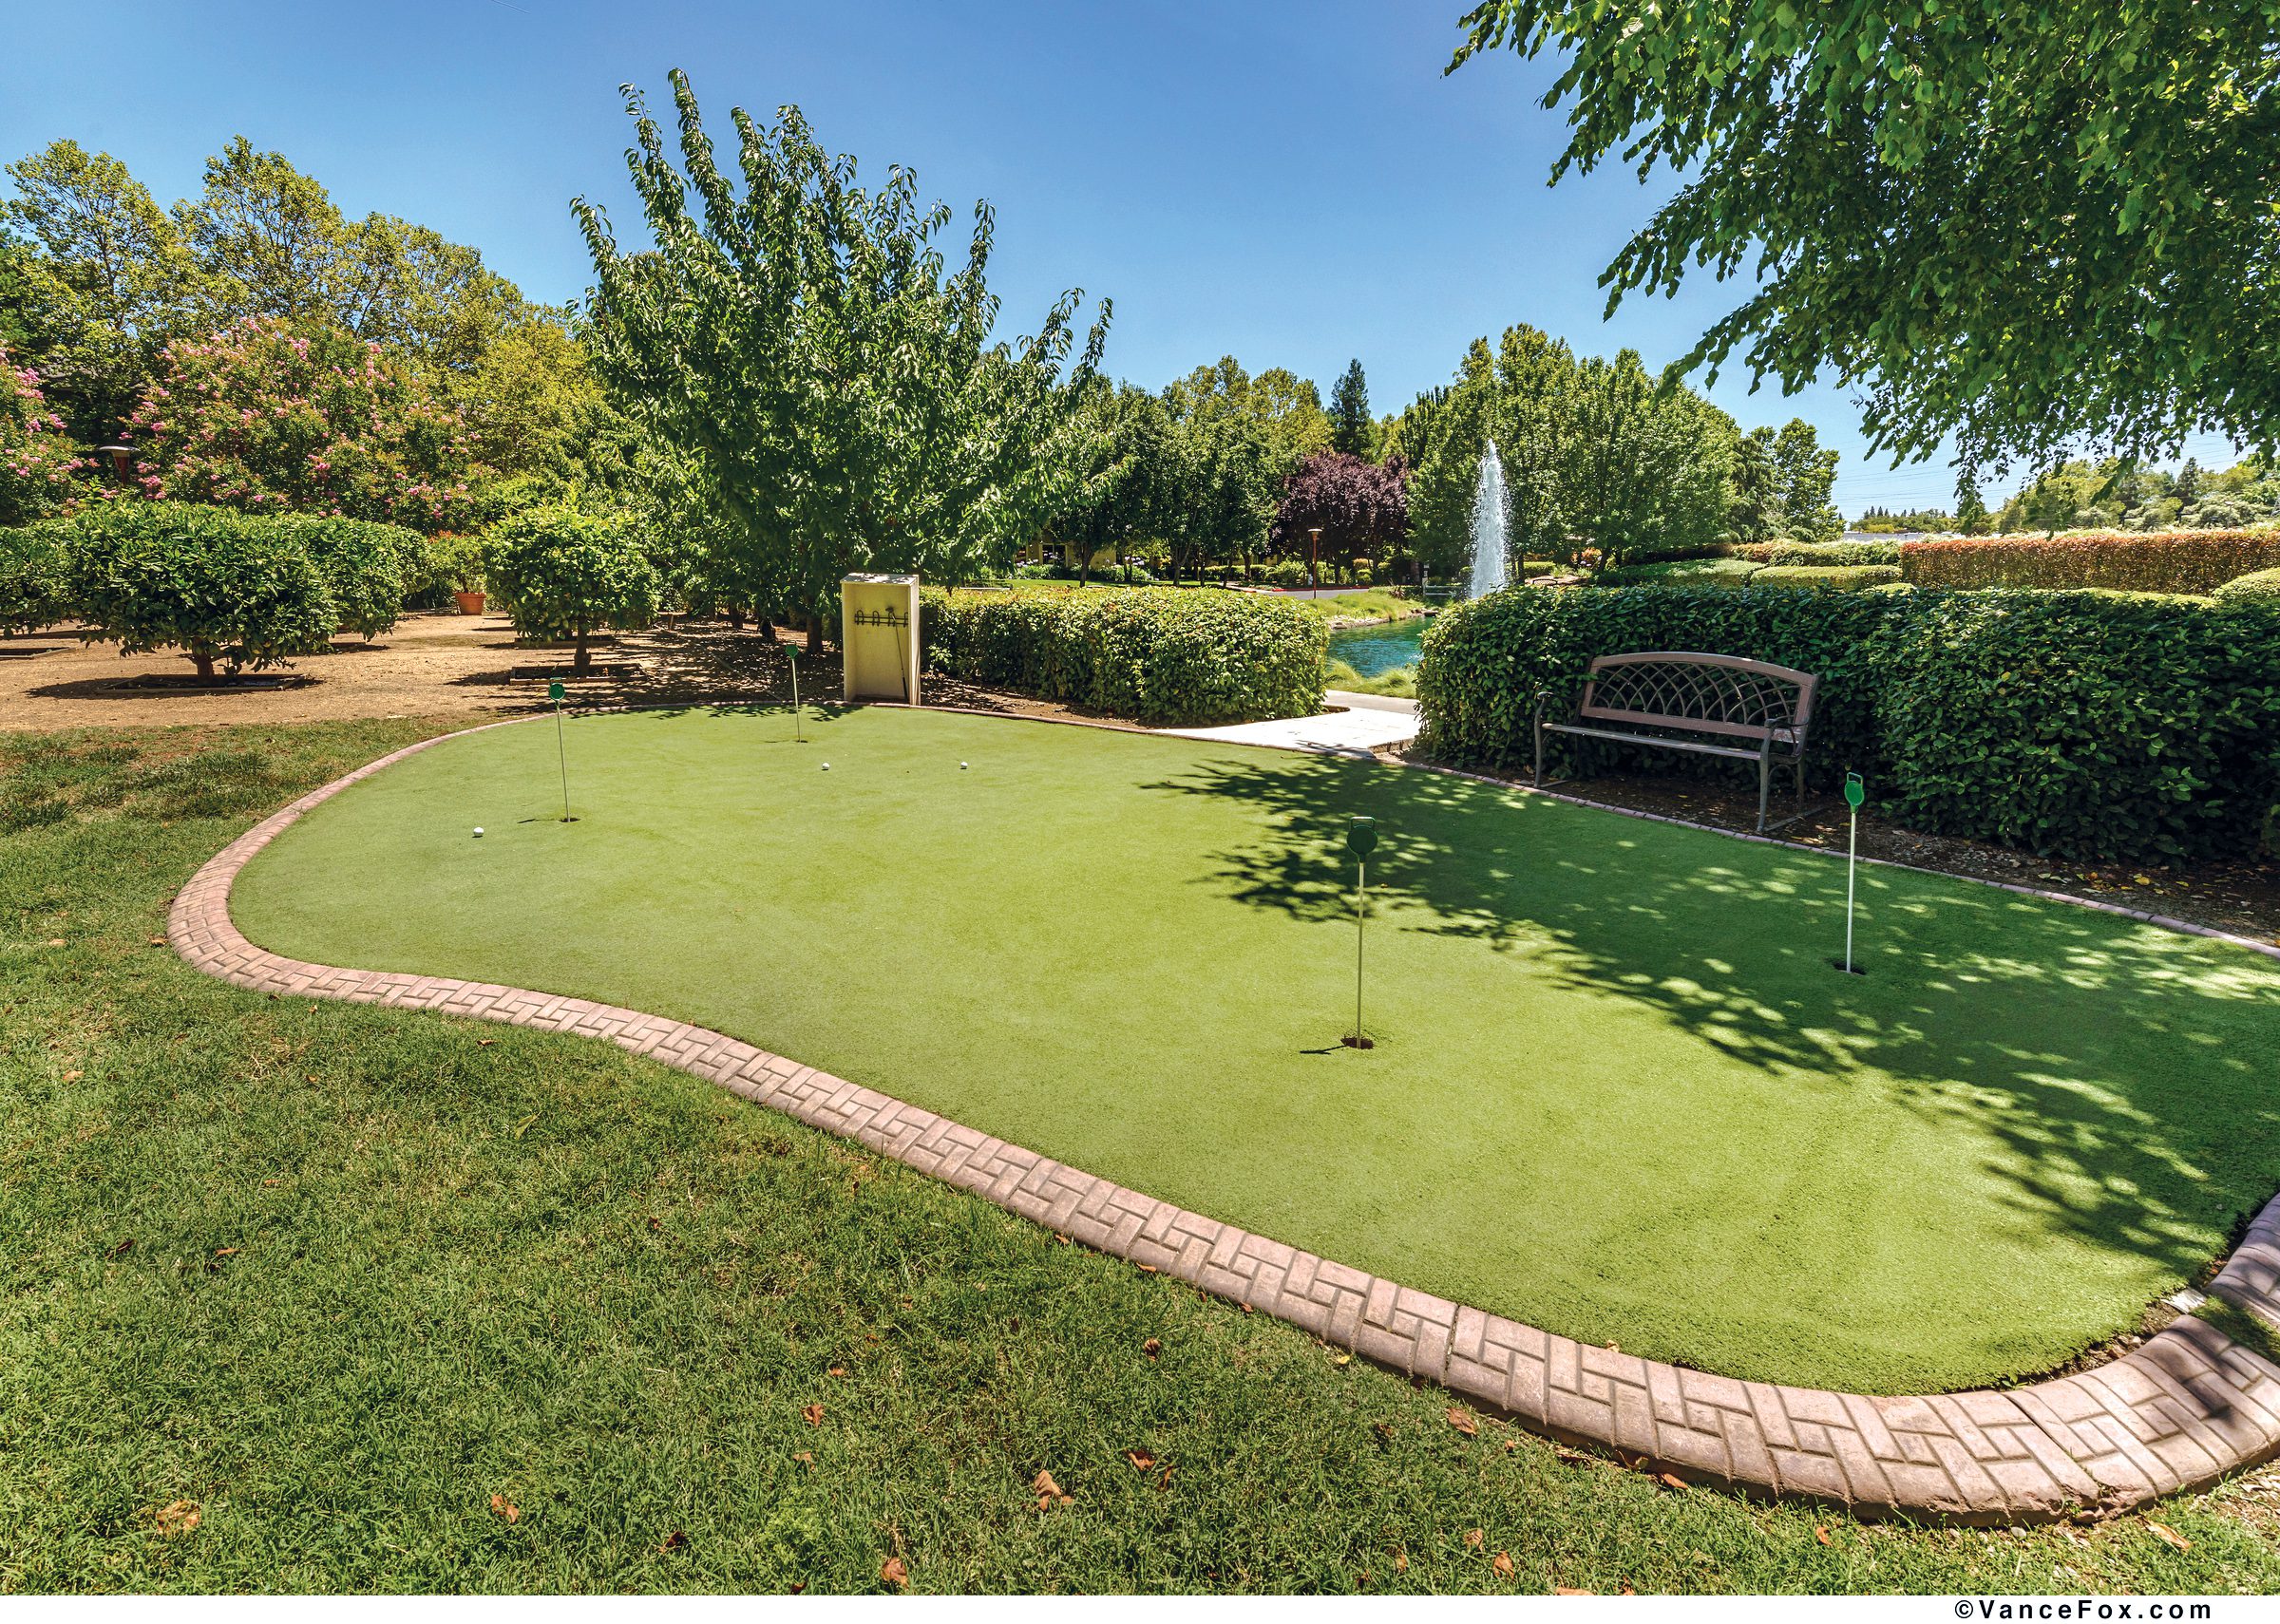 A backyard putting green with a serene fountain, perfect for practicing your golf skills.